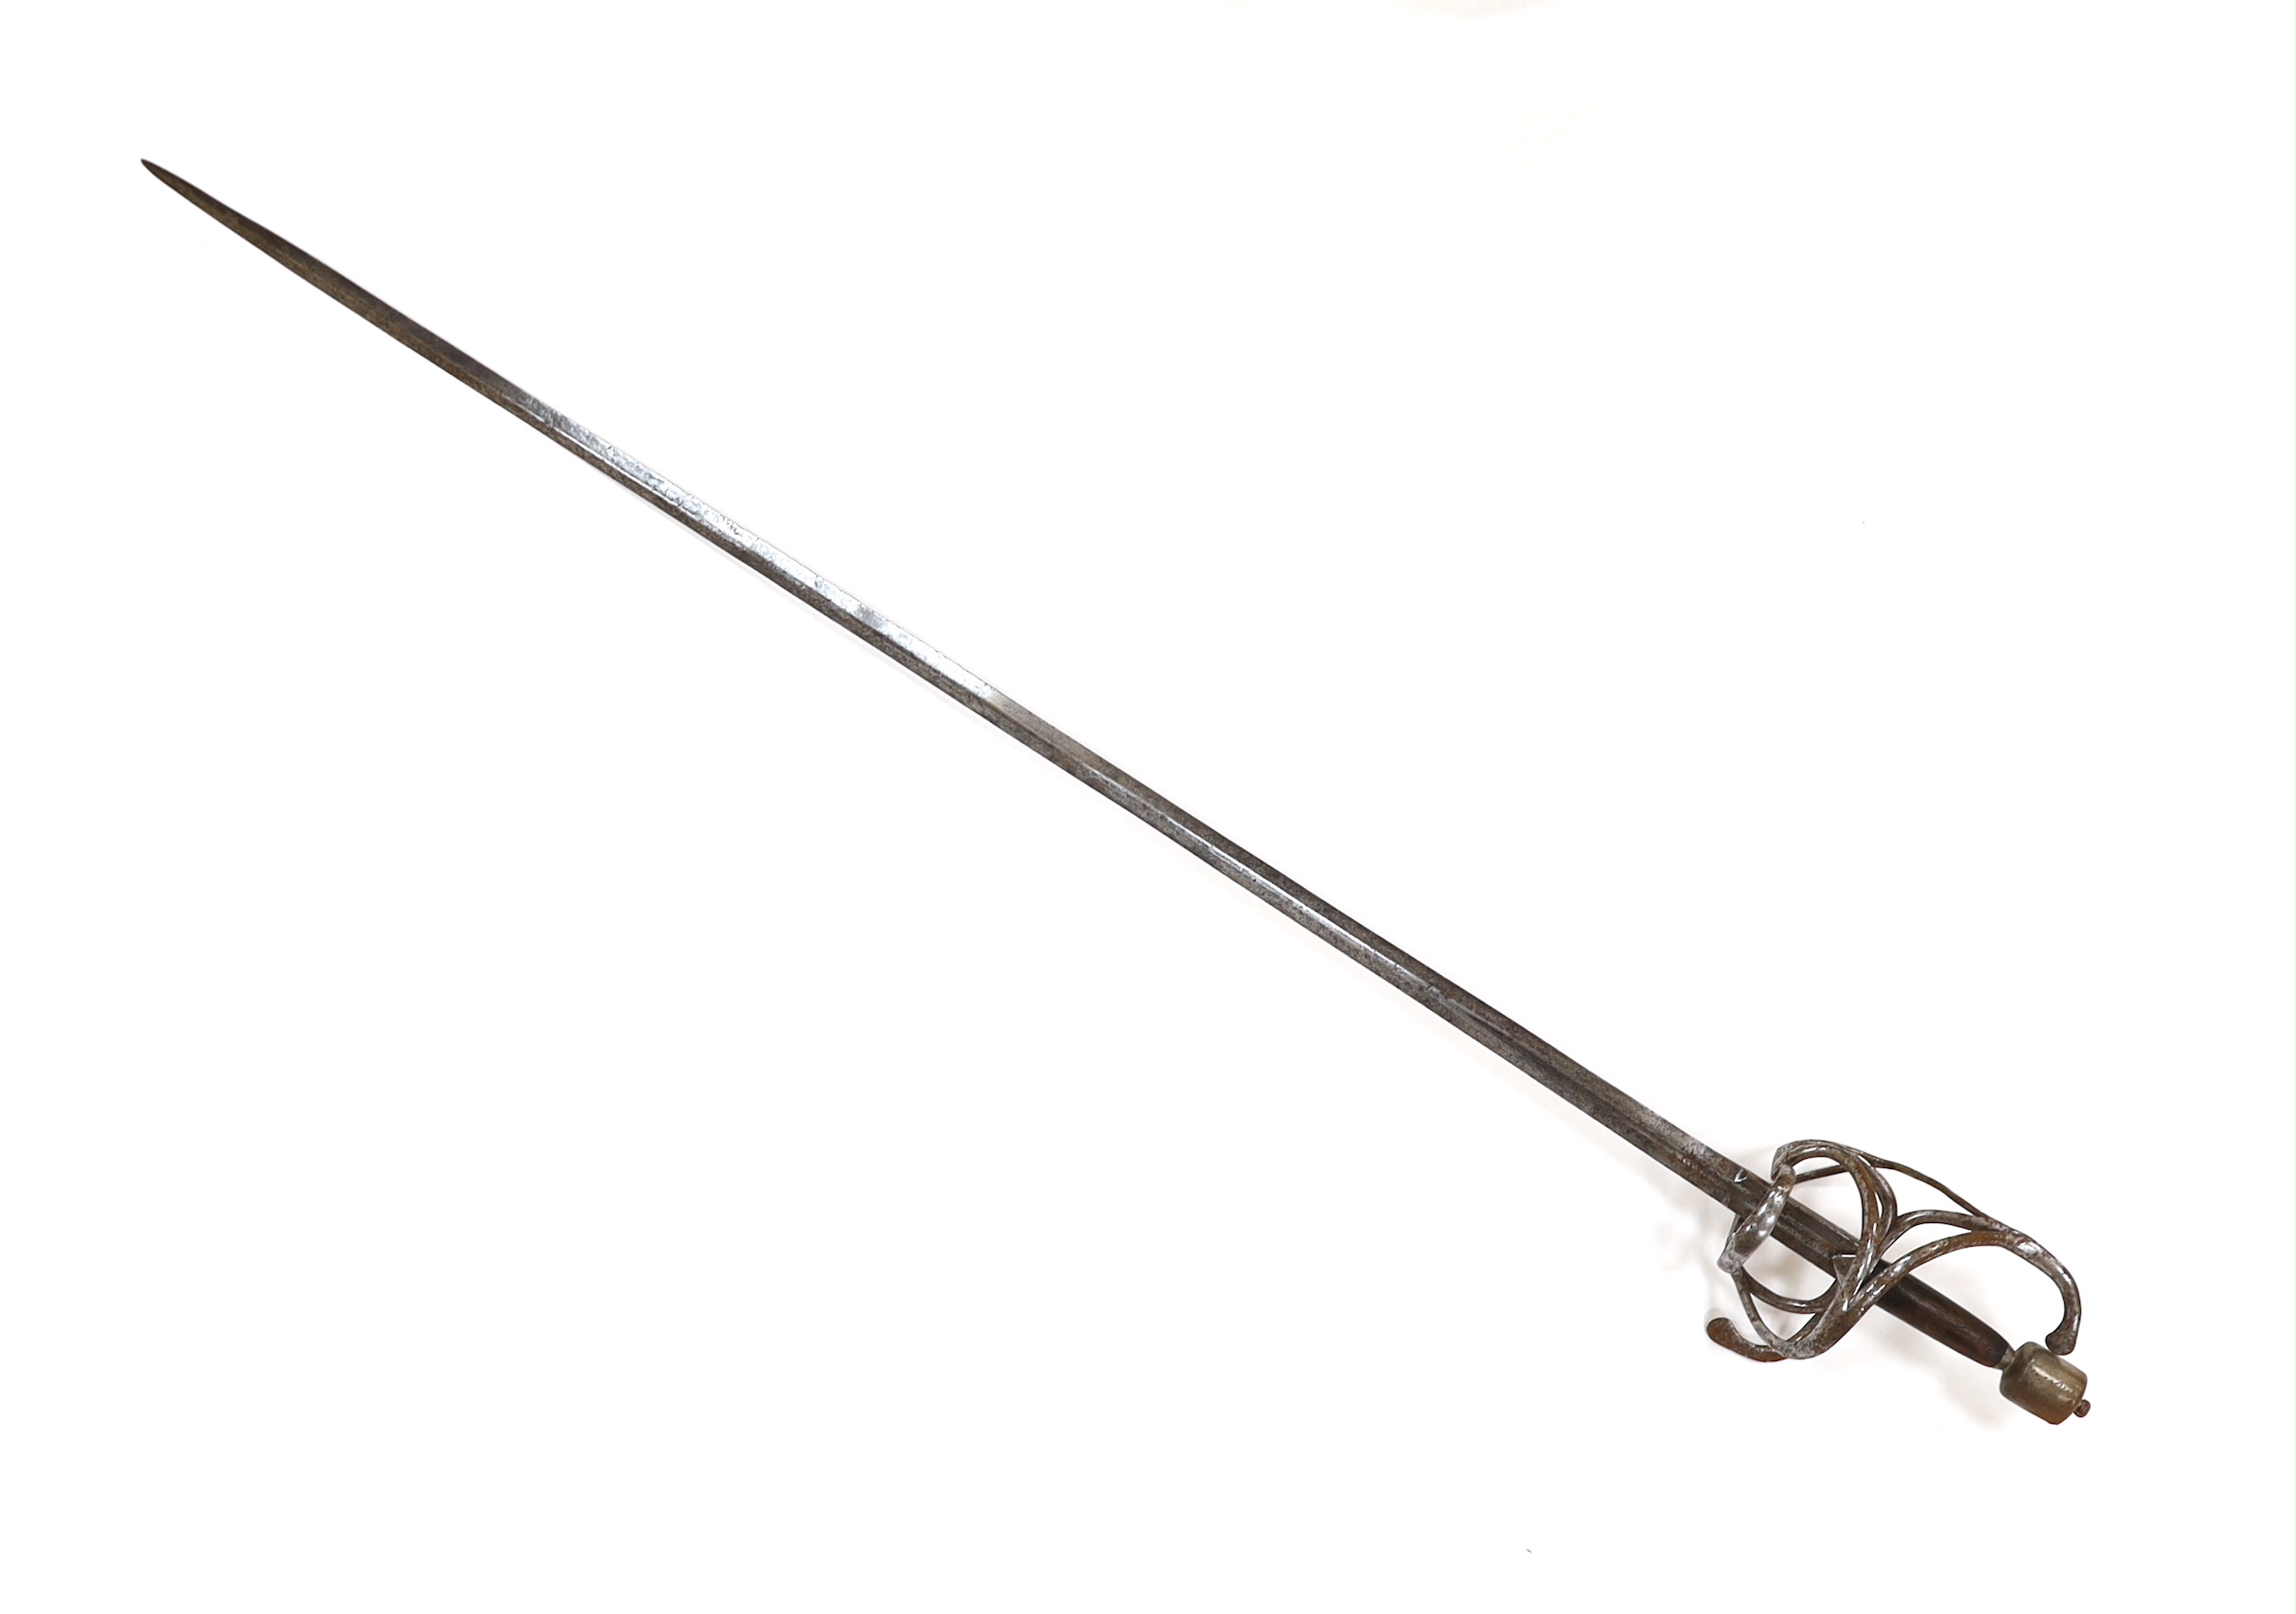 A swept hilt rapier, c.1620, blade fullered at the forte, iron guard of conventional form with later pommel and wooden grip, blade 113cm